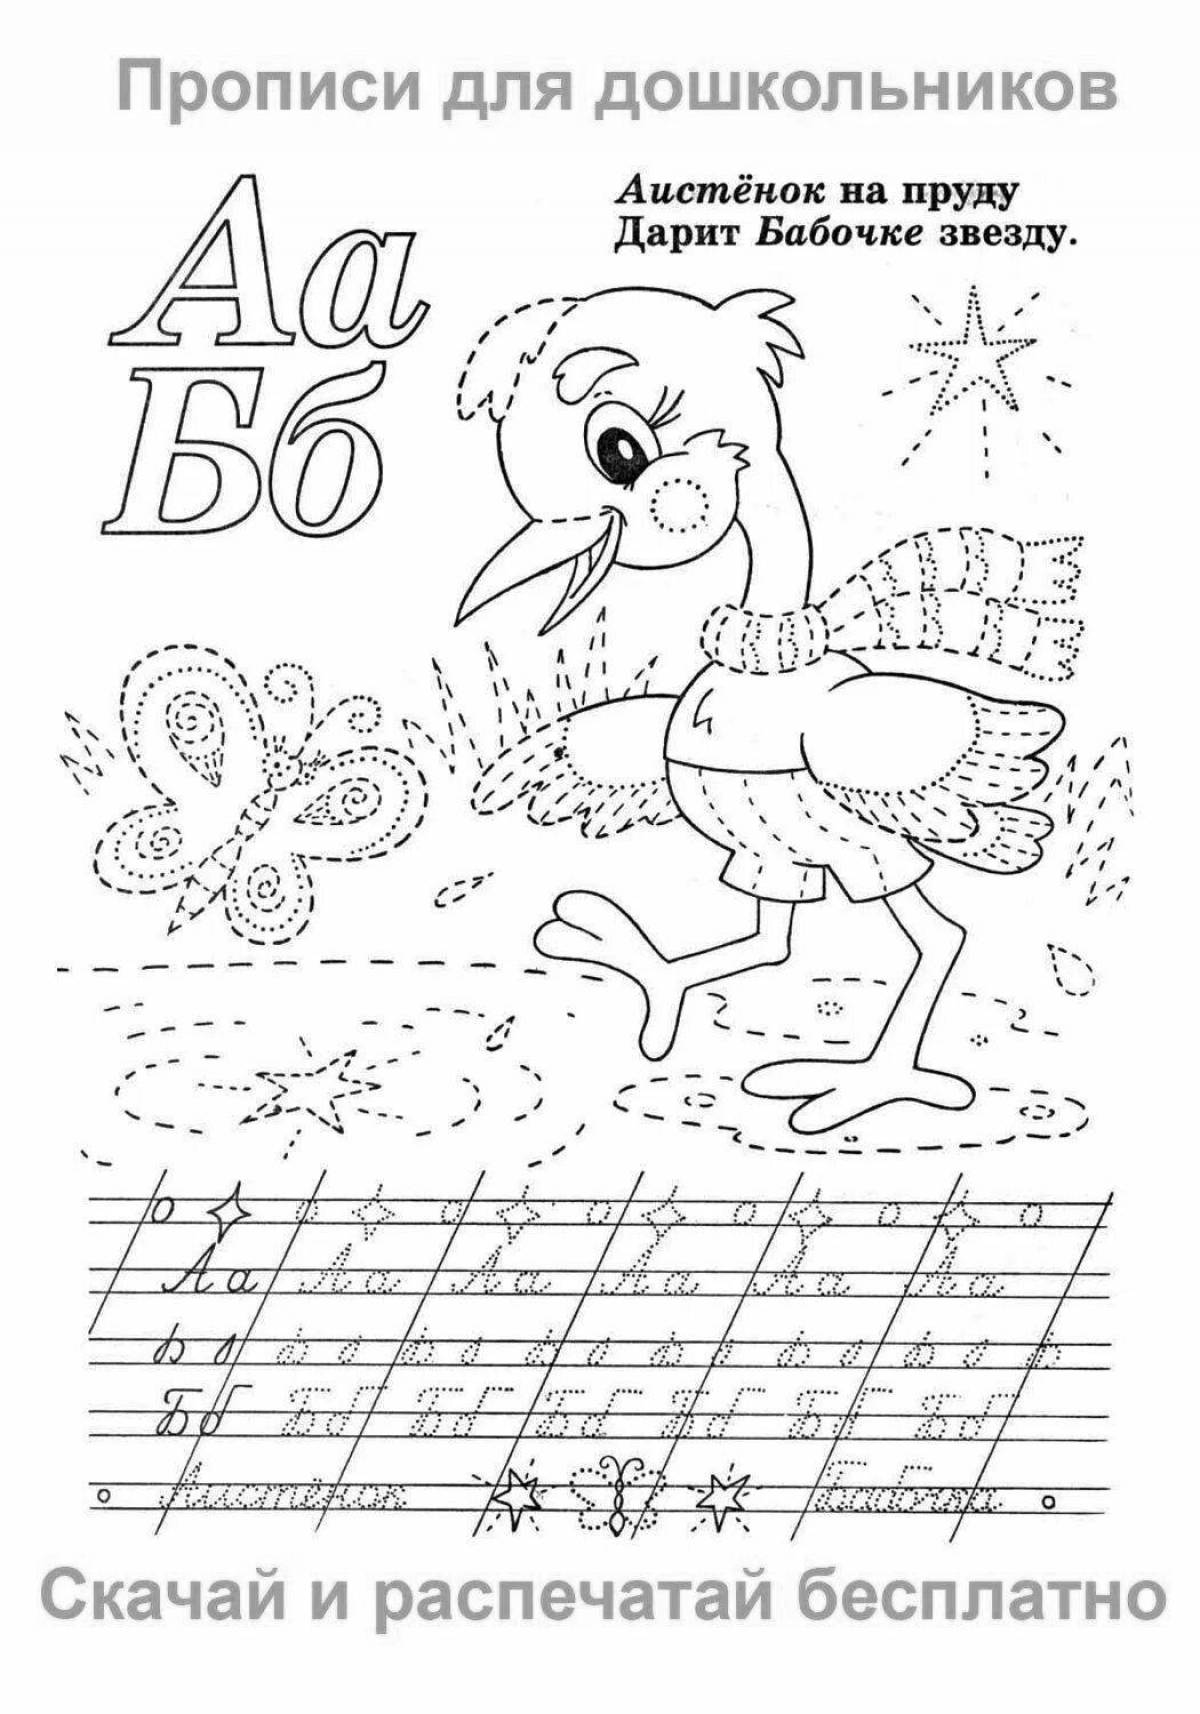 Fun letter coloring for 5-6 year olds